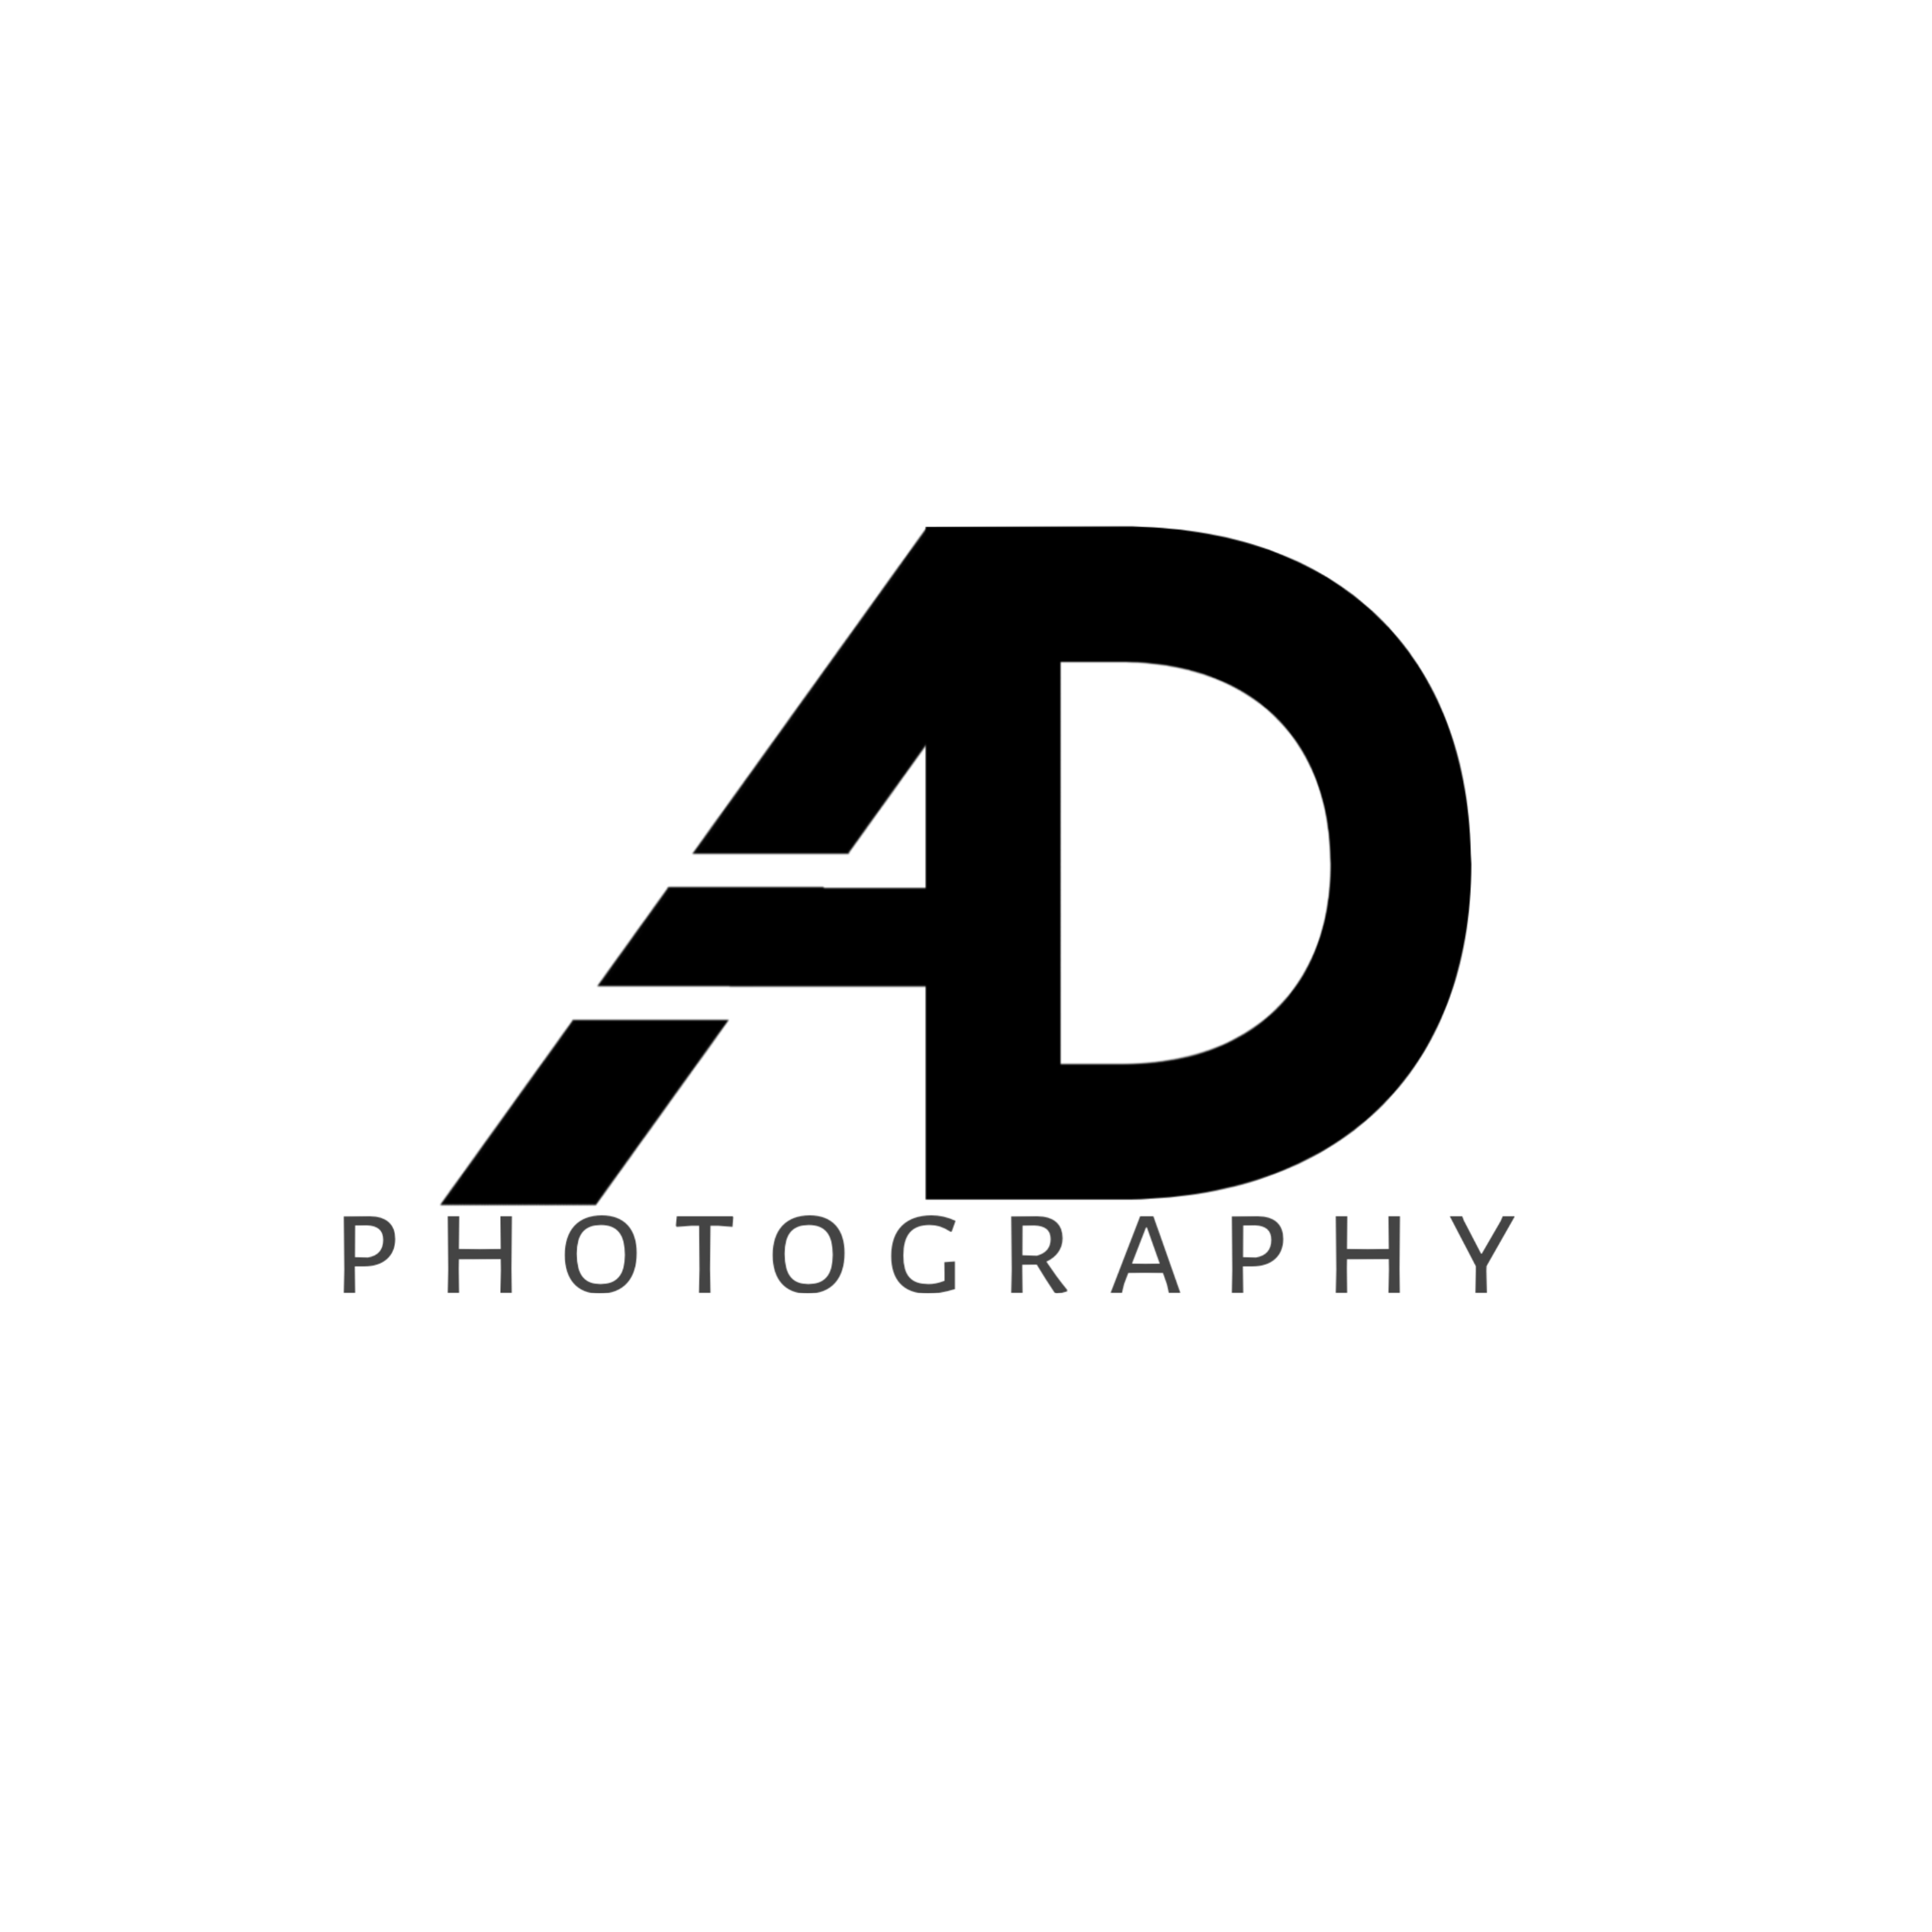 Black background with the word photography written in white.